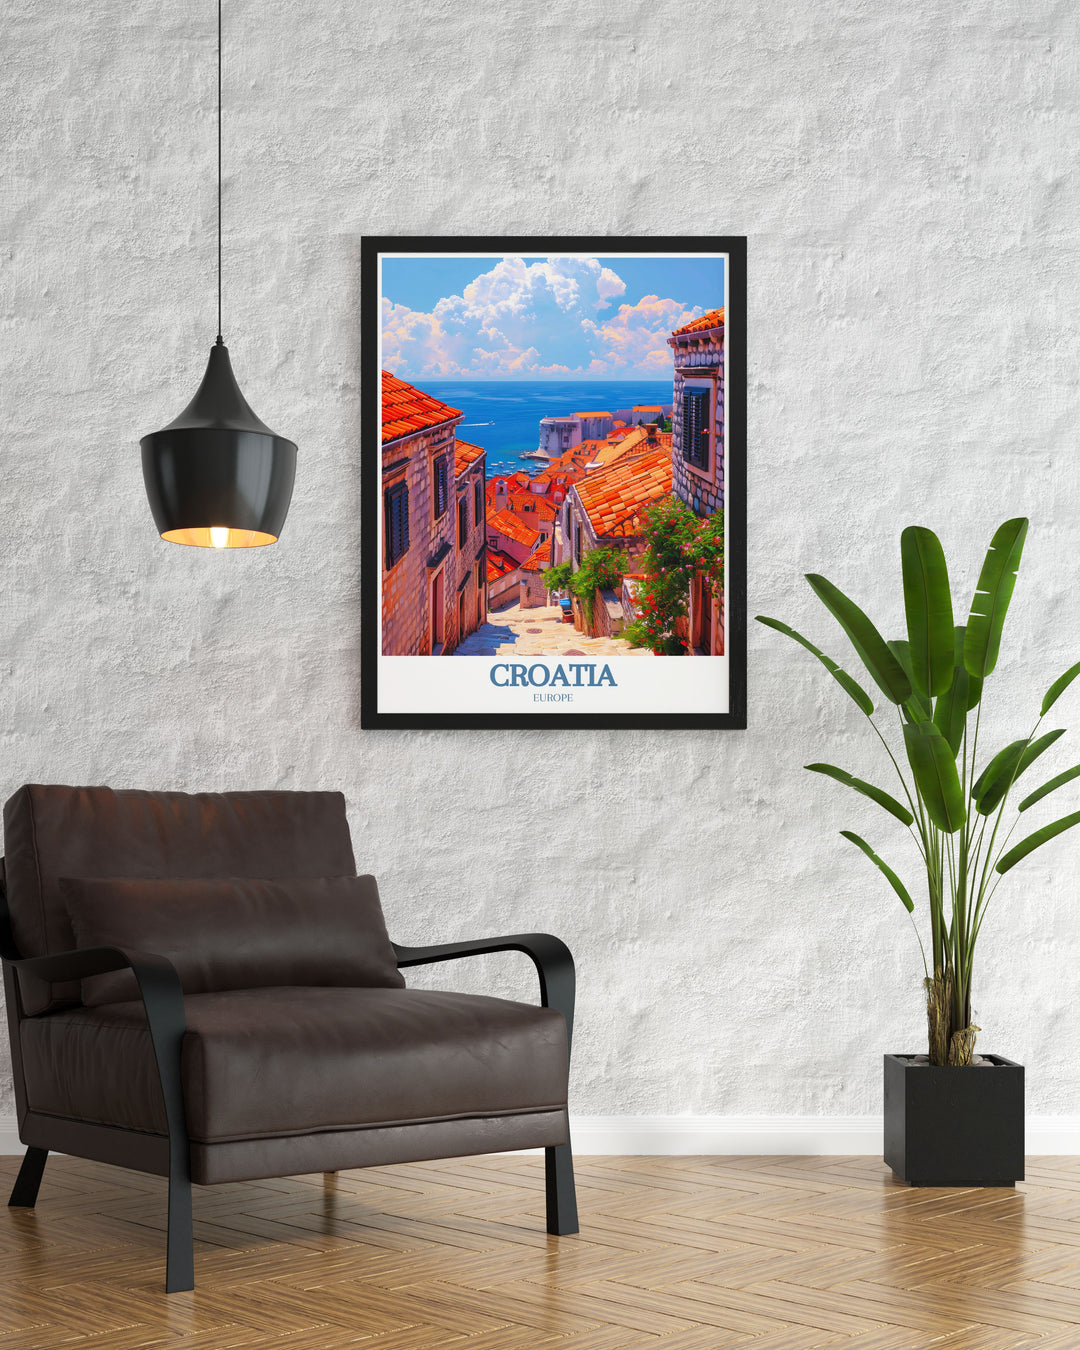 This poster showcases the picturesque streets of Split and the clear waters of the Adriatic Sea, adding a unique touch of Croatias cultural and natural beauty to your living space.